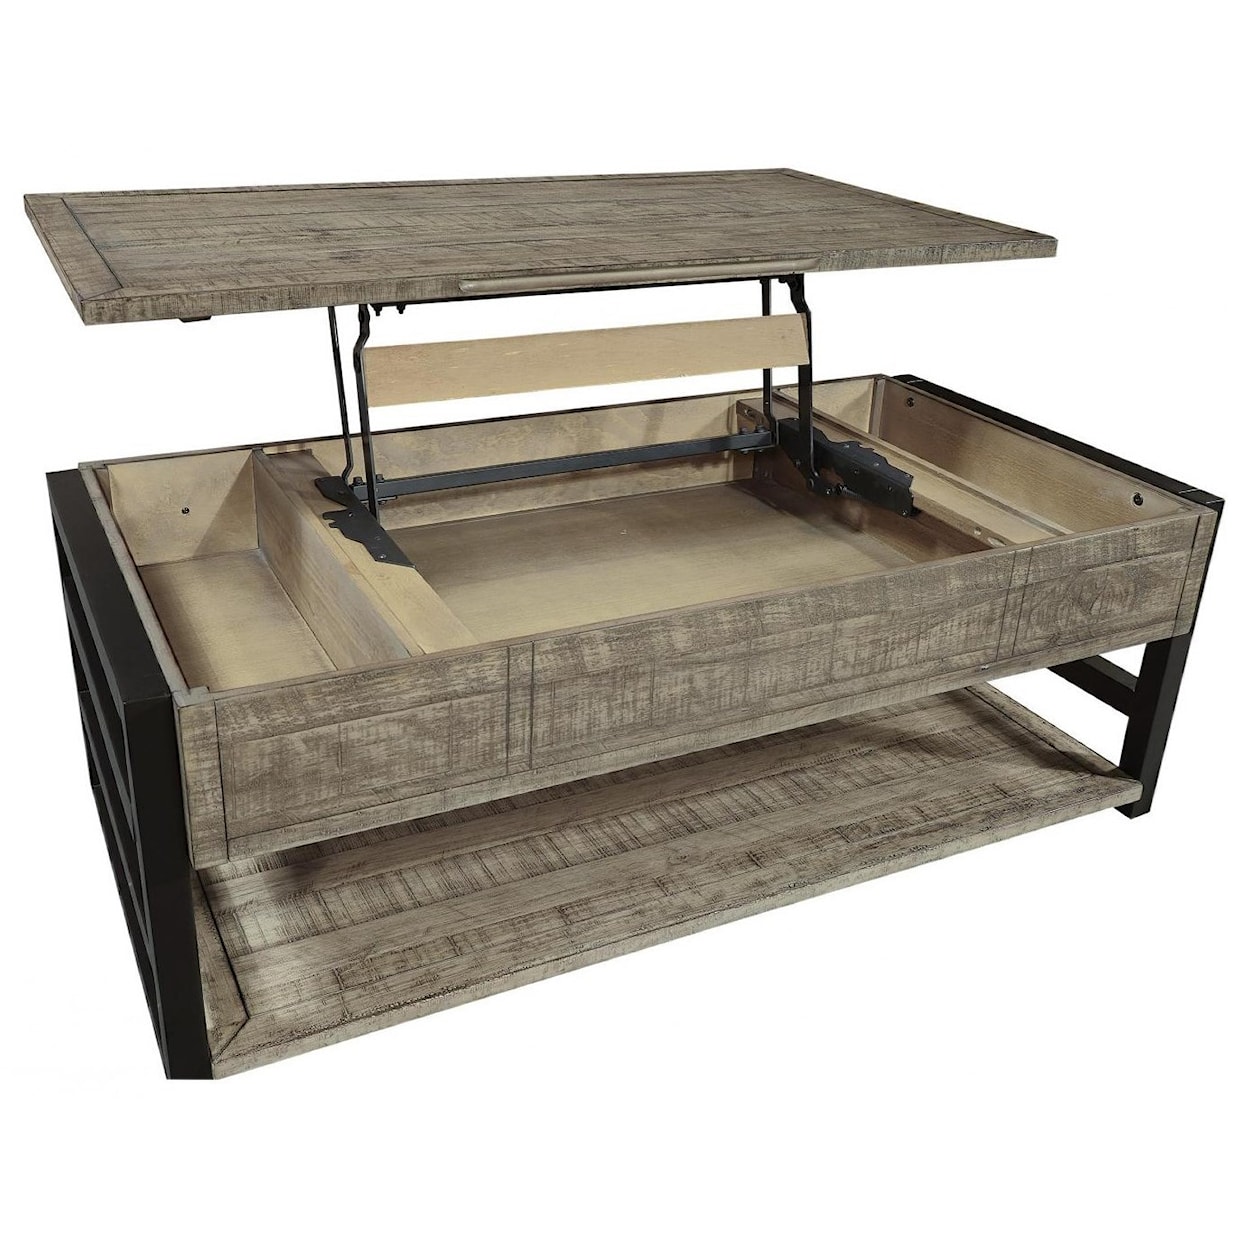 Aspenhome Grayson Lift Top Cocktail Table